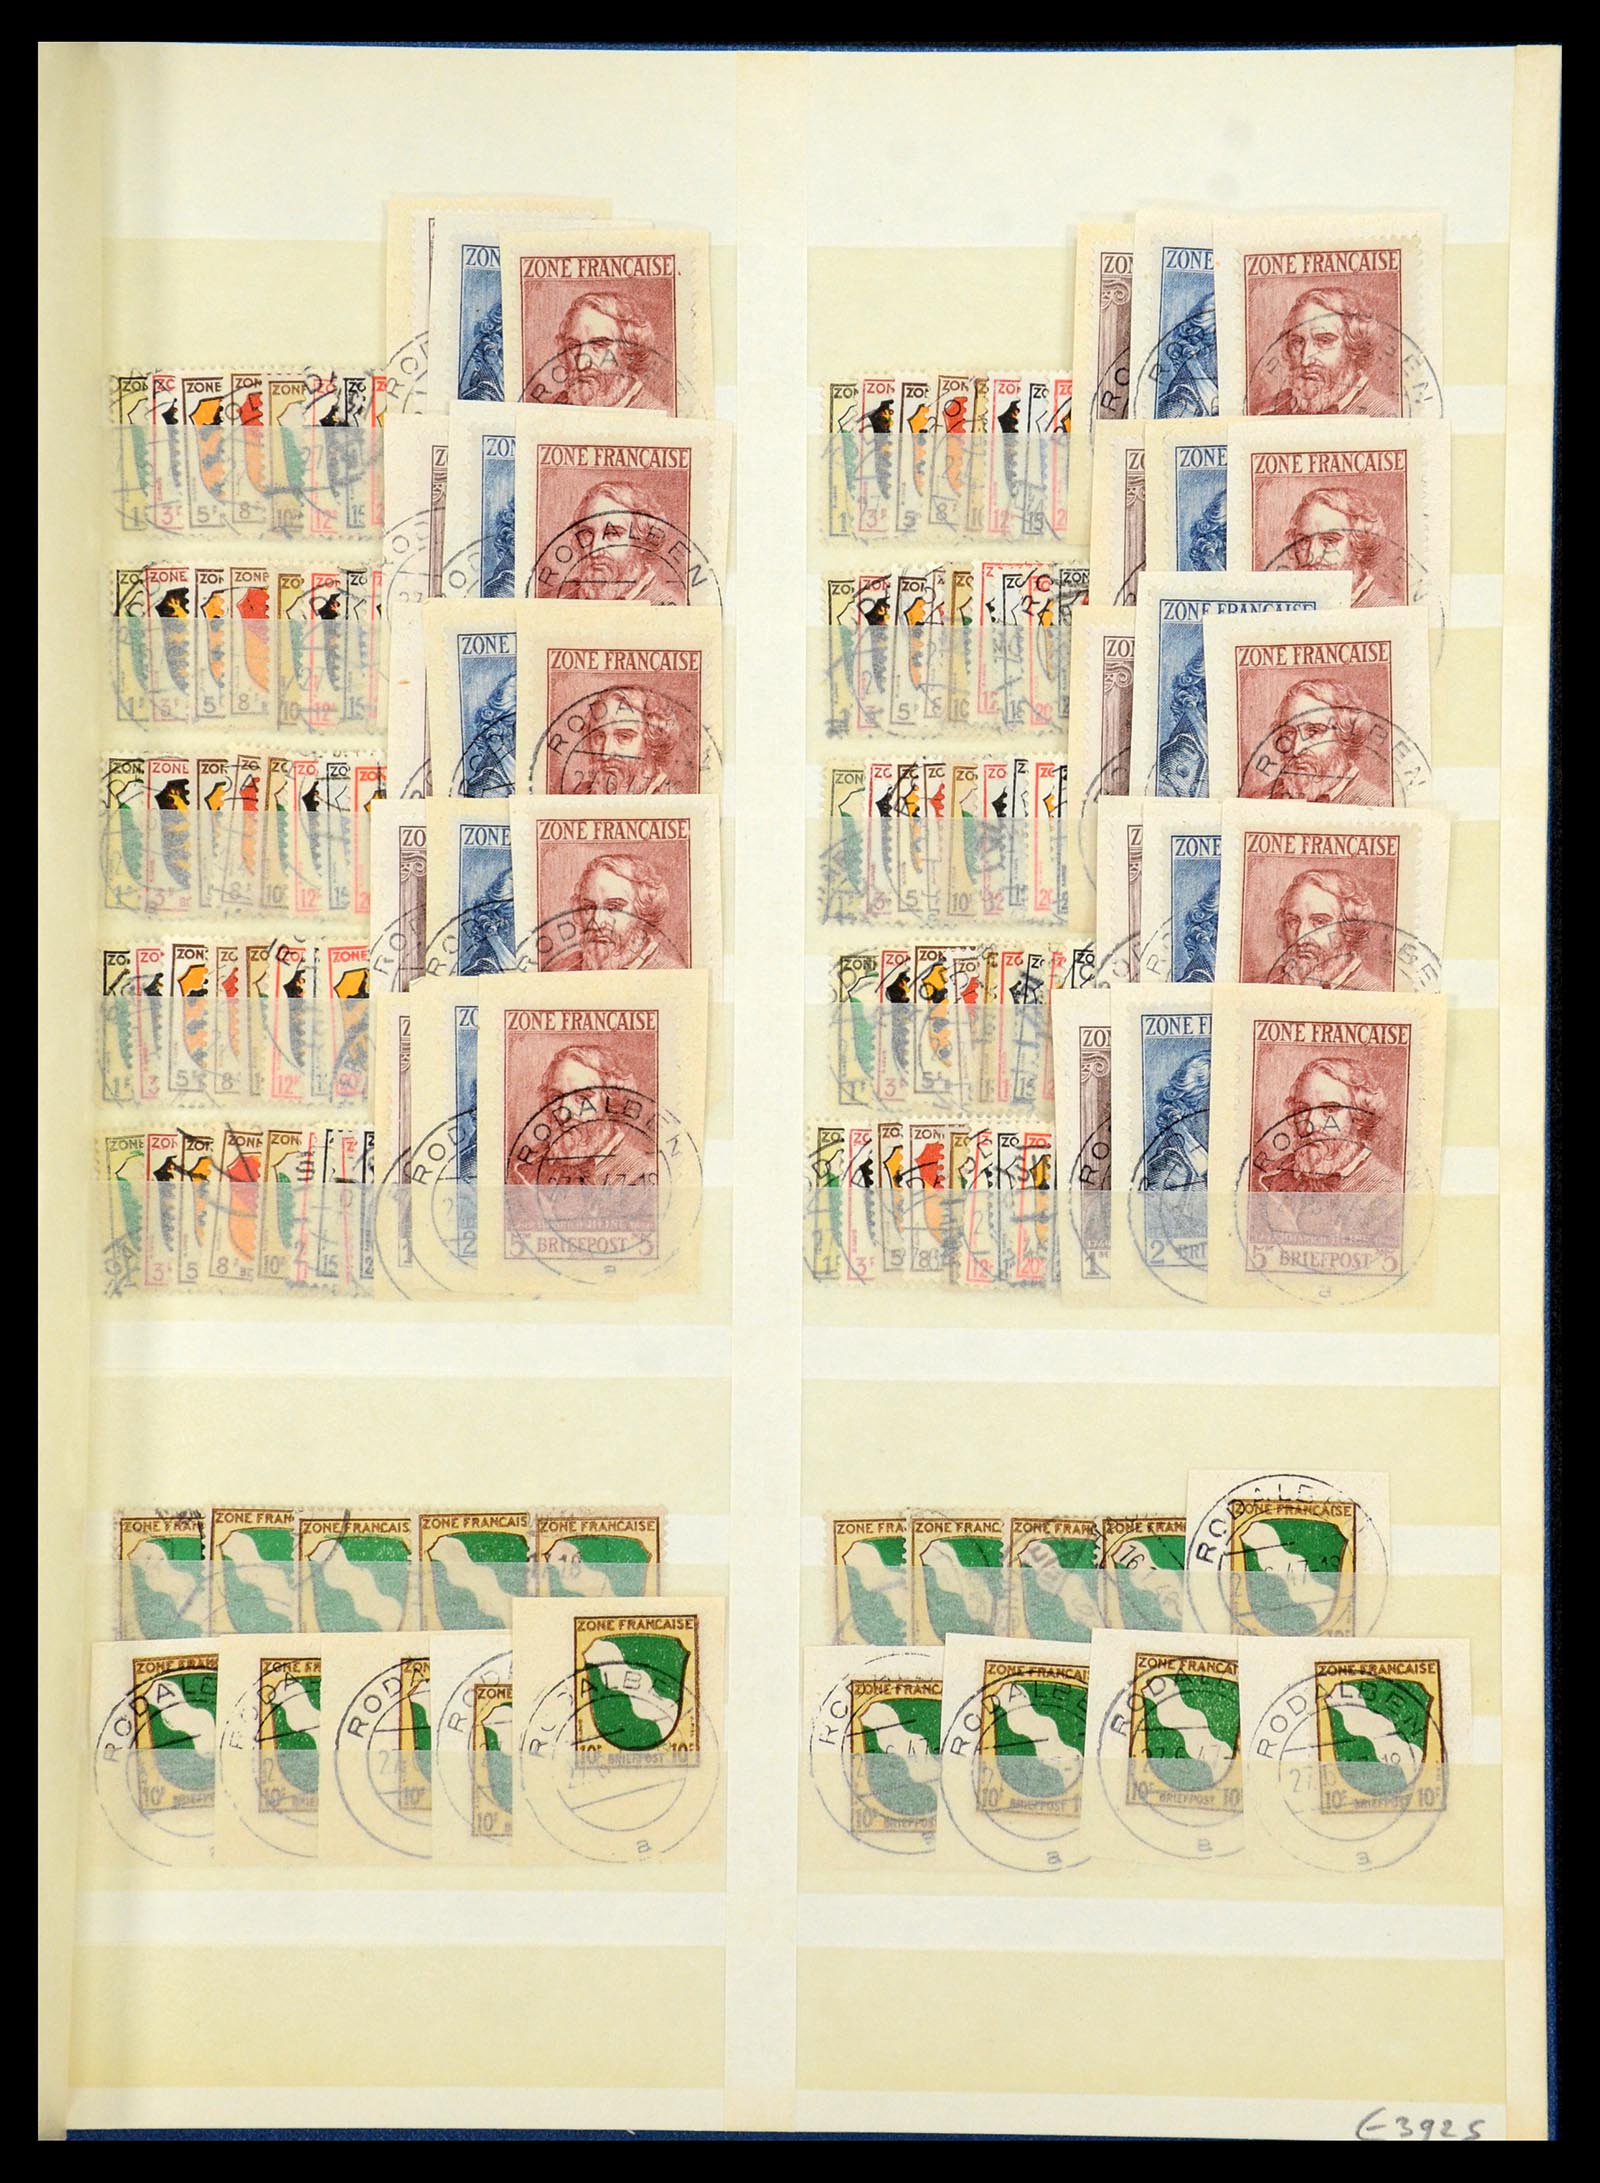 35545 001 - Stamp Collection 35545 French Zone 1945-1949.